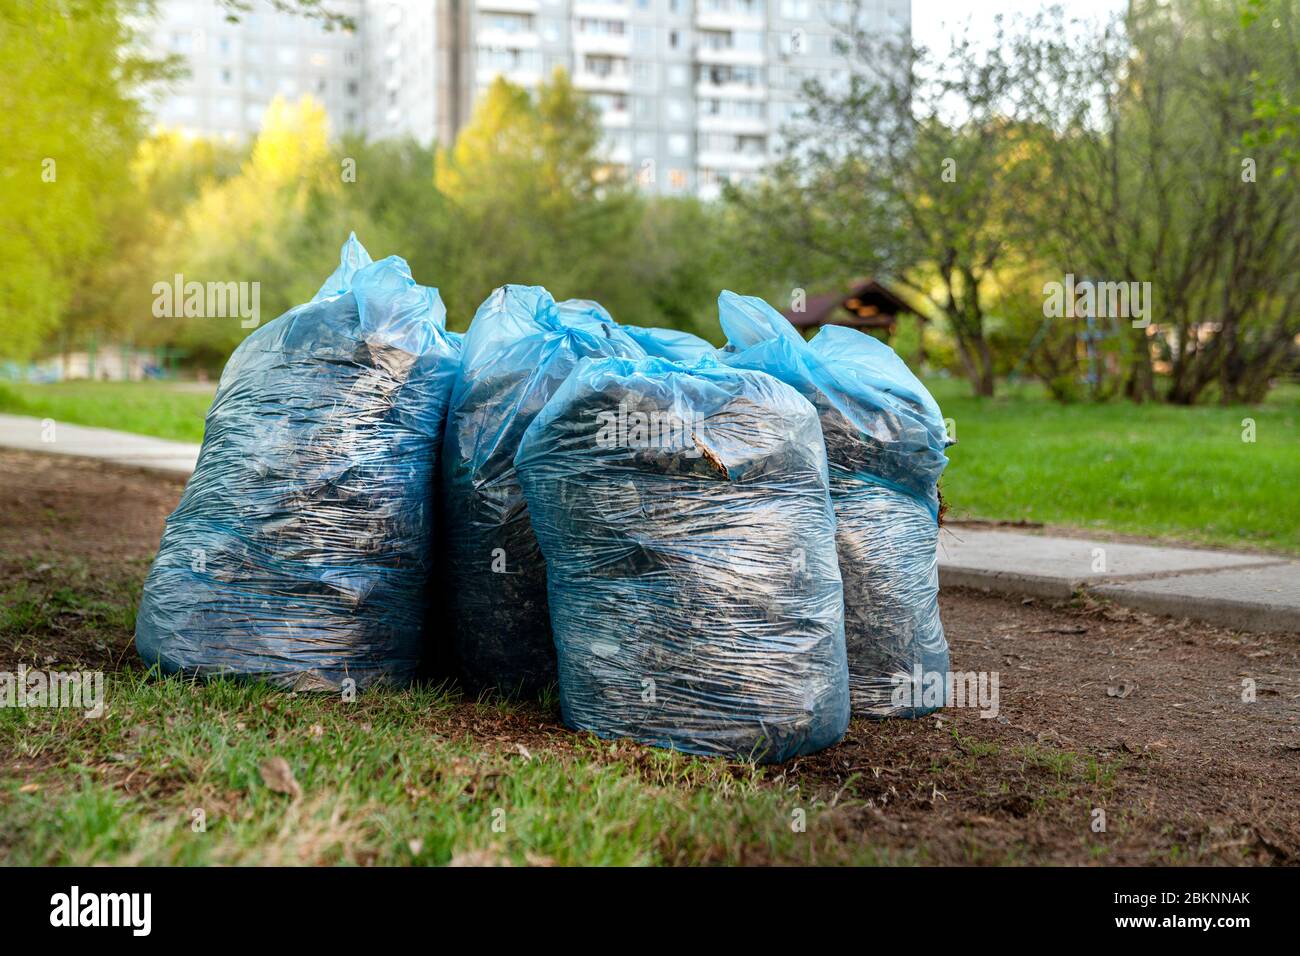 https://c8.alamy.com/comp/2BKNNAK/bags-of-garbage-leaves-and-old-grass-stand-on-the-green-lawn-in-the-yard-spring-cleaning-of-streets-courtyards-and-surrounding-areas-2BKNNAK.jpg